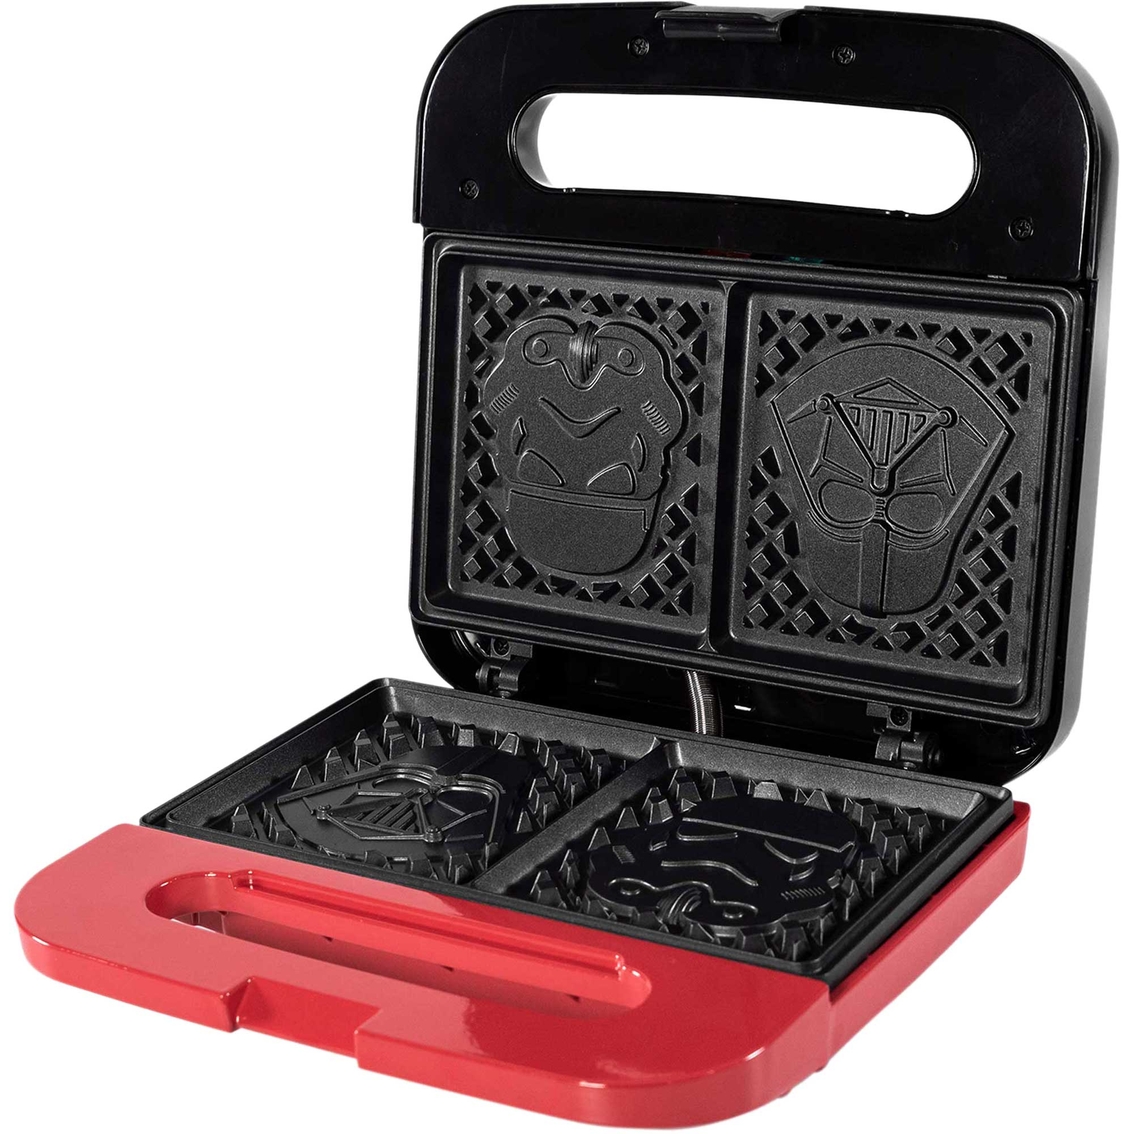 Star Wars Darth Vader and Stormtrooper Double Square Waffle Maker - Image 4 of 6